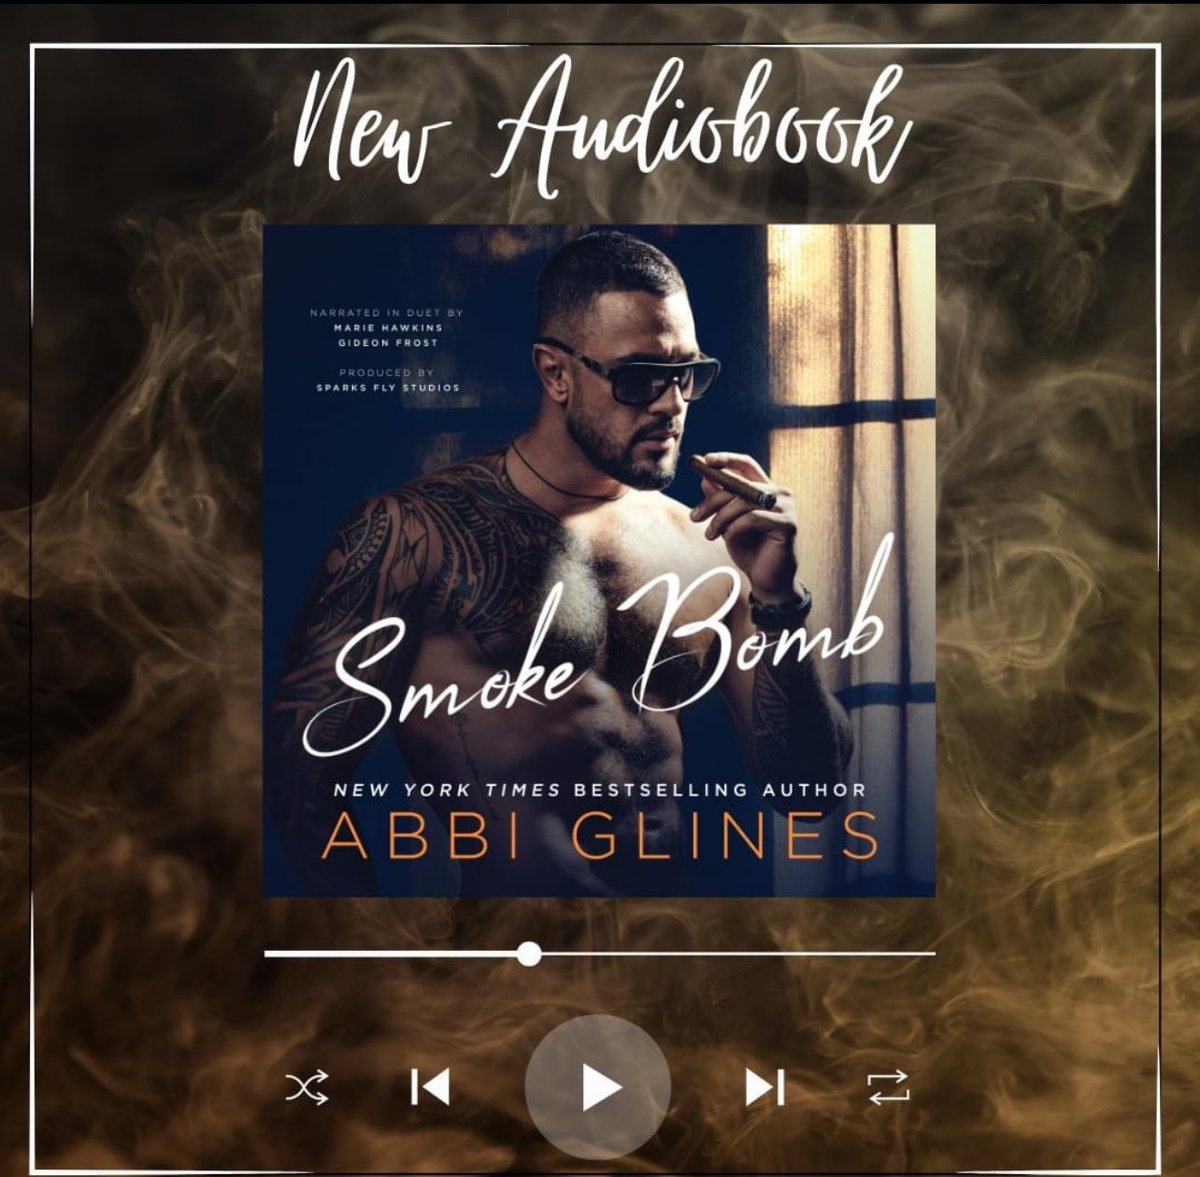 🎧NEW AUDIOBOOK🎧 𝐒𝐦𝐨𝐤𝐞 𝐁𝐨𝐦𝐛 is live in audiobook! Narrated by Gideon Frost and Marie Hawkins 🎧Listen here: amzn.to/4b3Vbht 📚Read with Kindle Unlimited here: geni.us/SmokeBomb